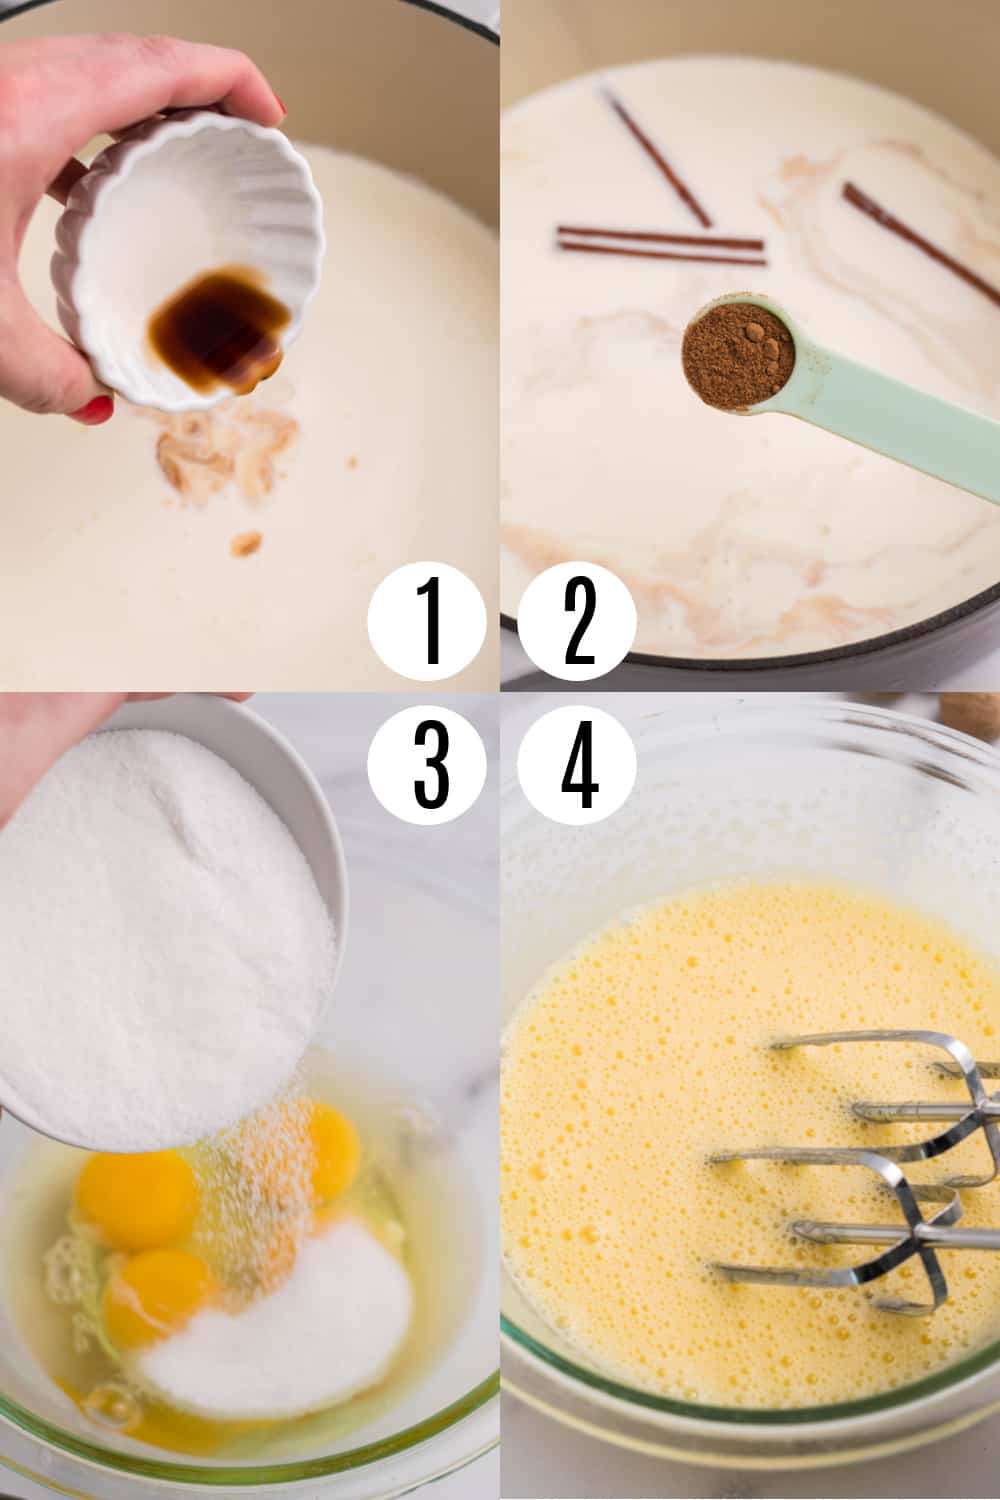 Step by step photos showing how to make eggnog.